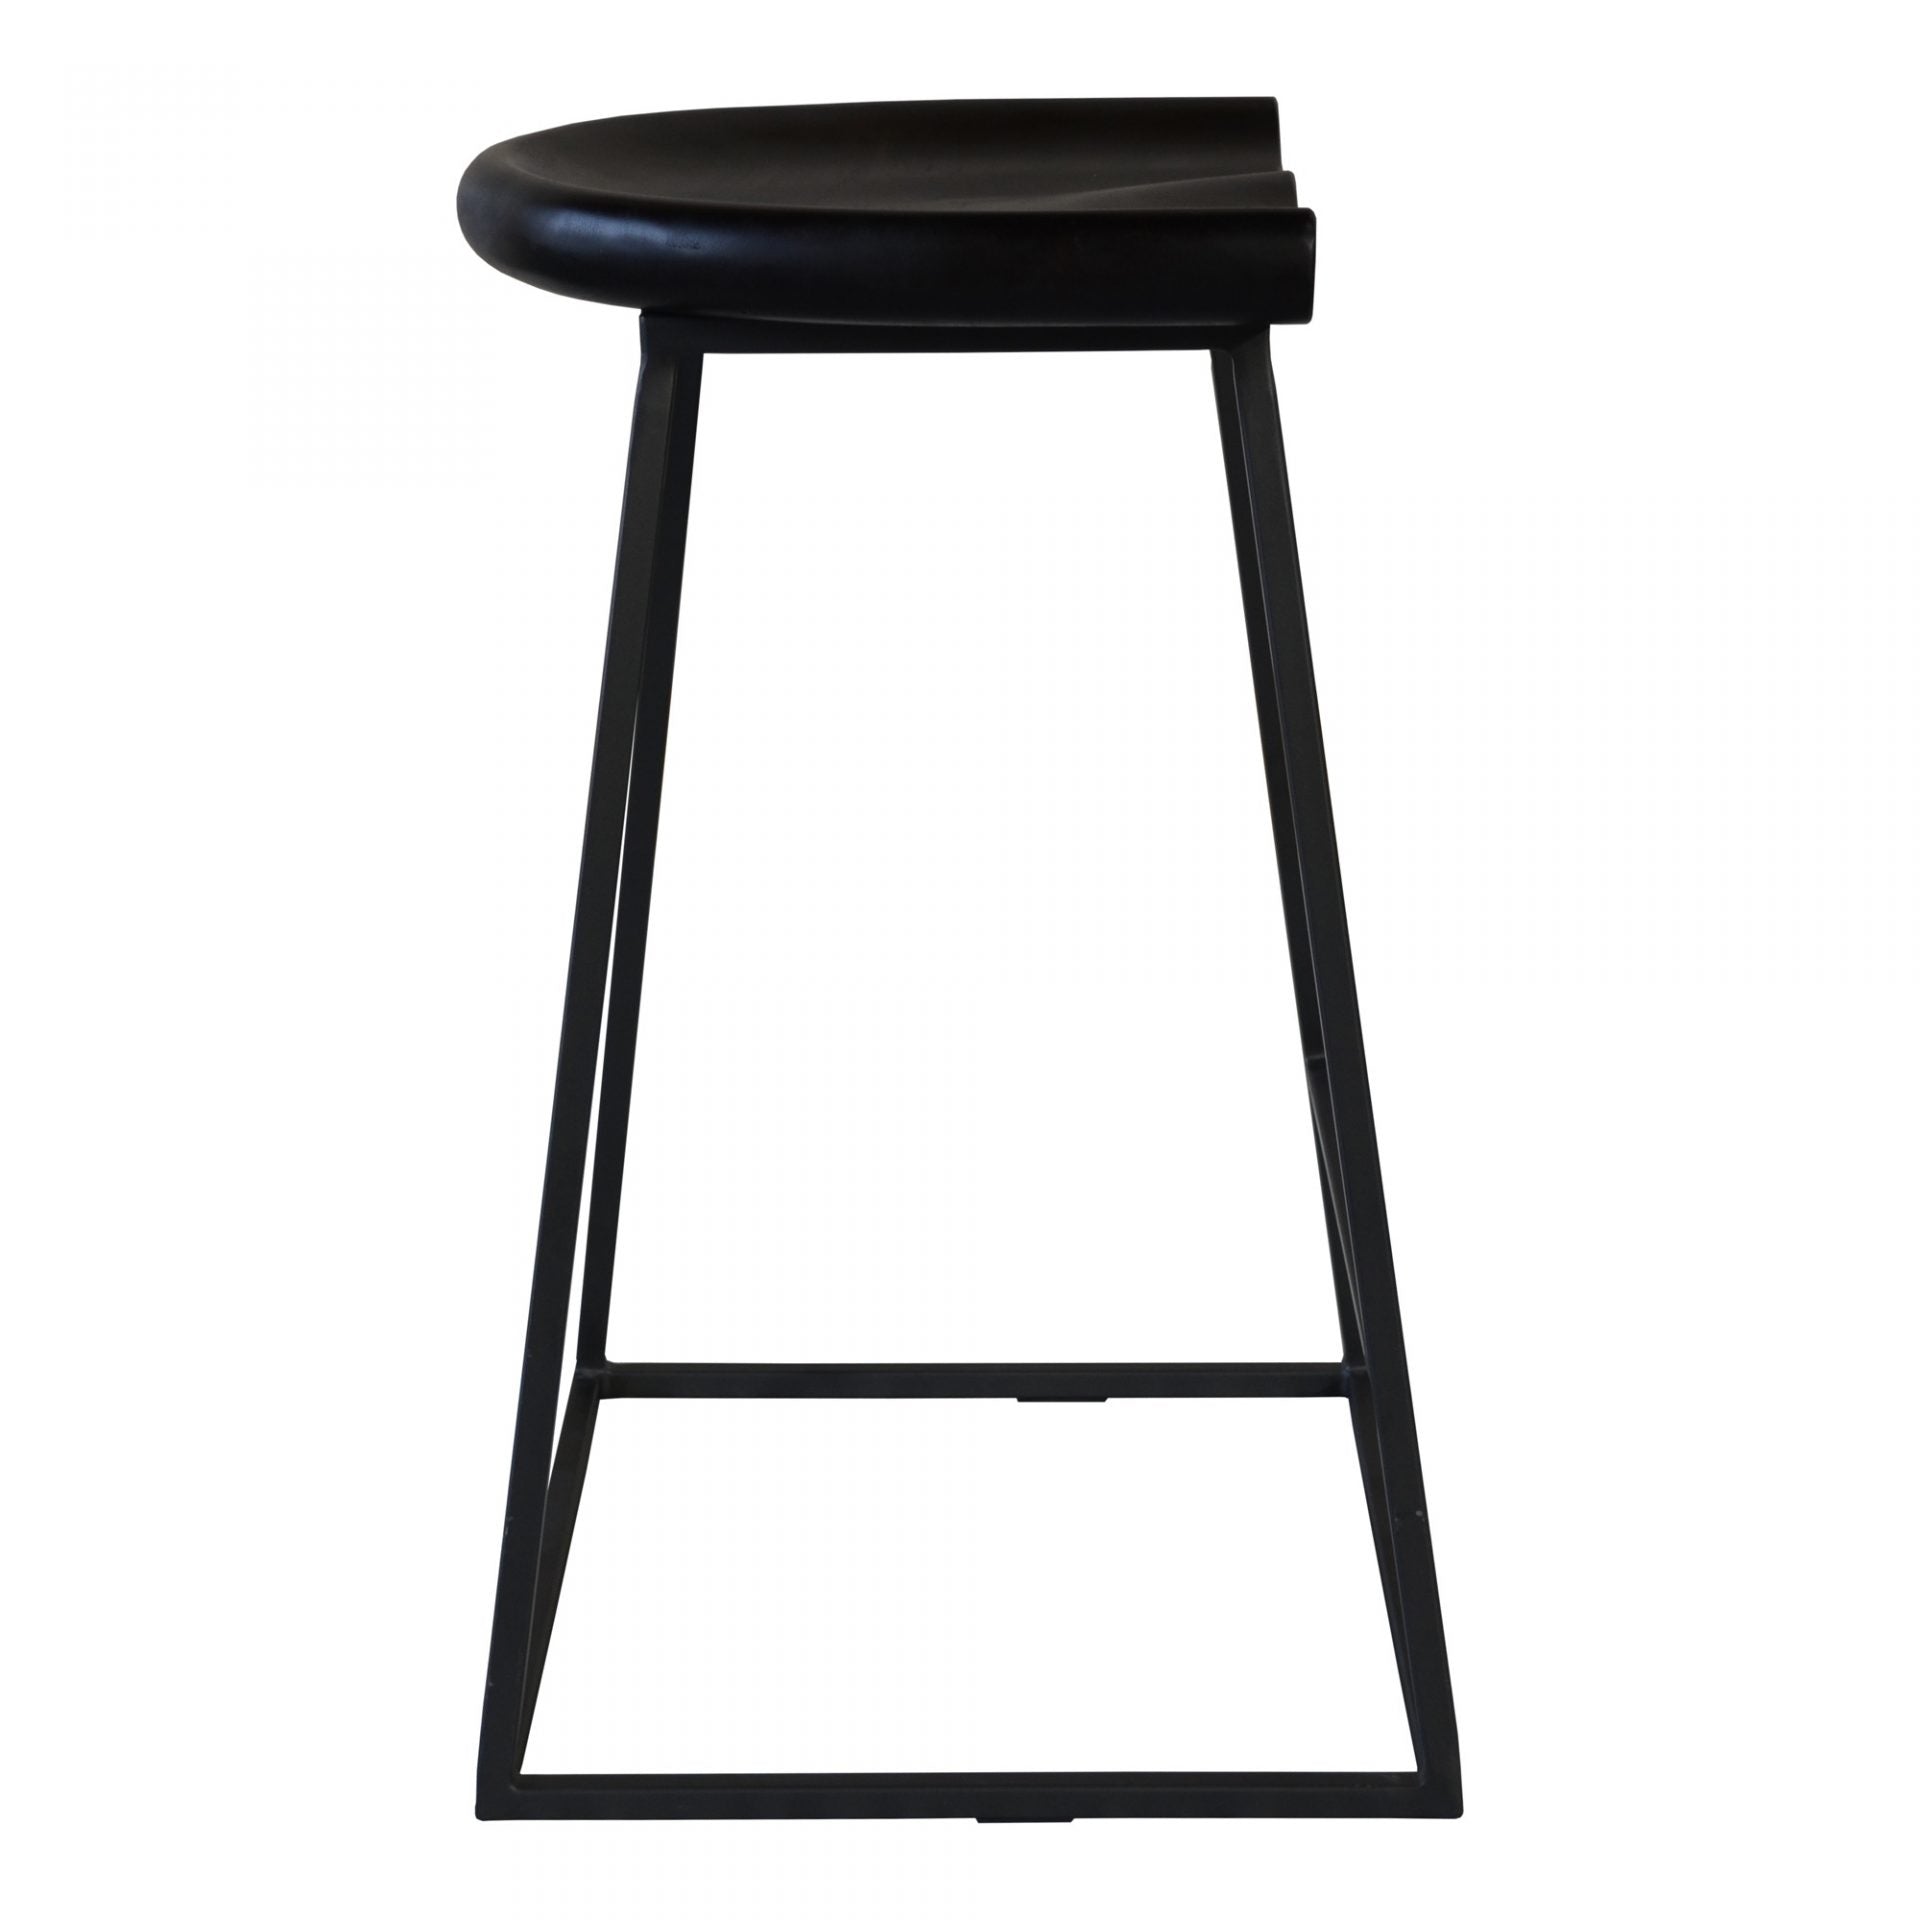 We love the acacia wood matched with the steel base of this Jackman Counter Stool. It brings an industrial vibe to any space.   Size: 16.5"w x 16"d x 25.5"h